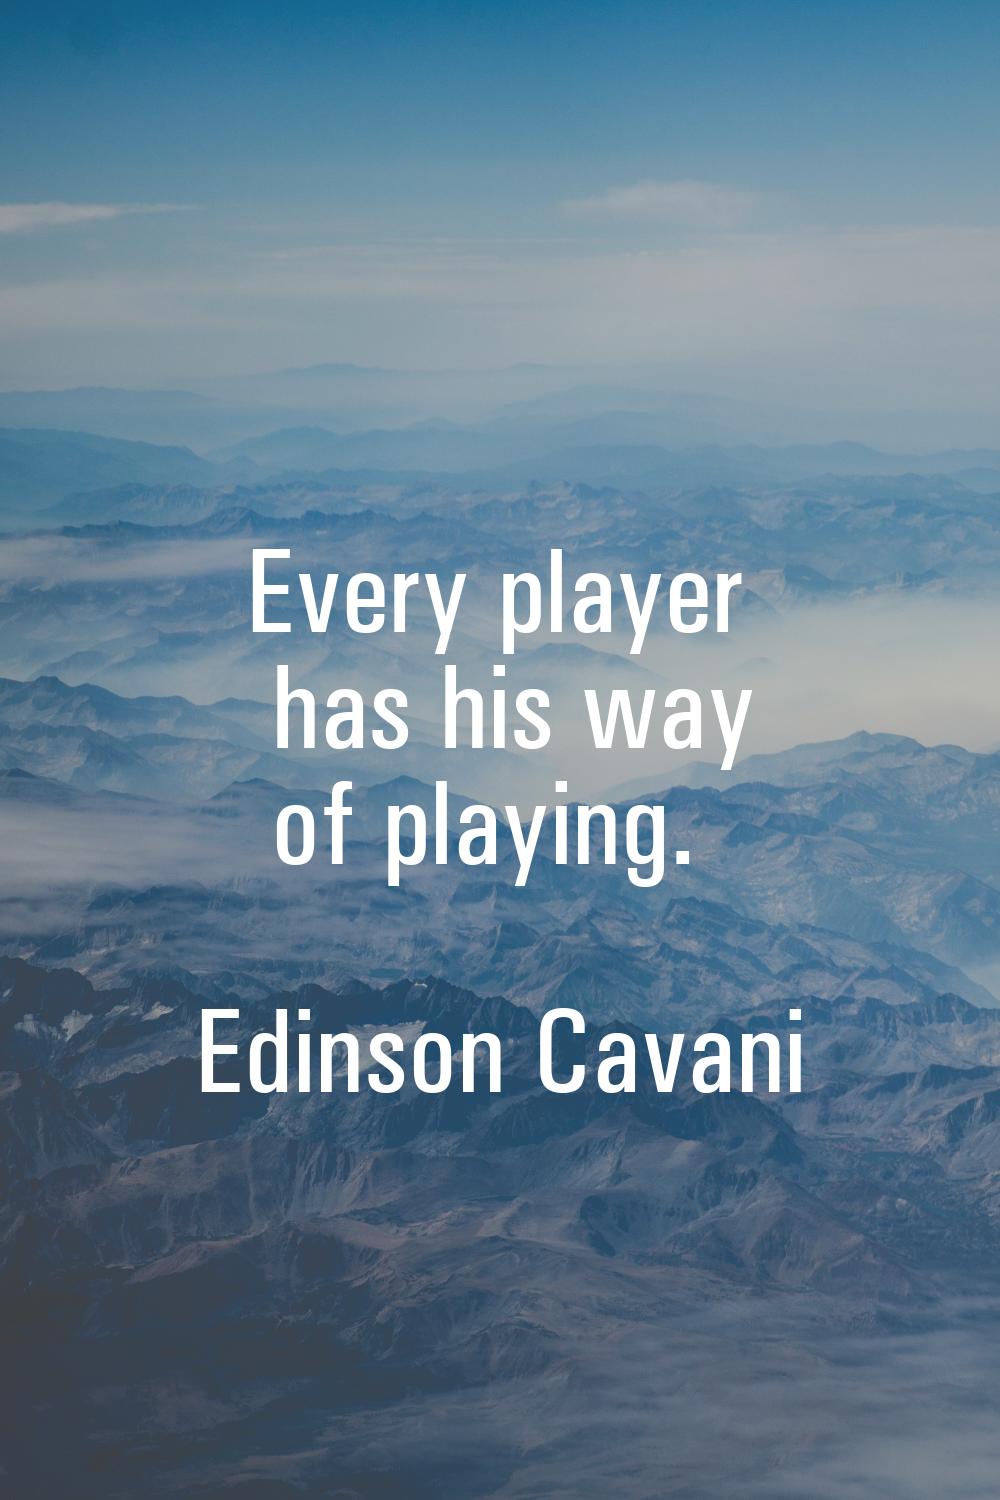 Every player has his way of playing.